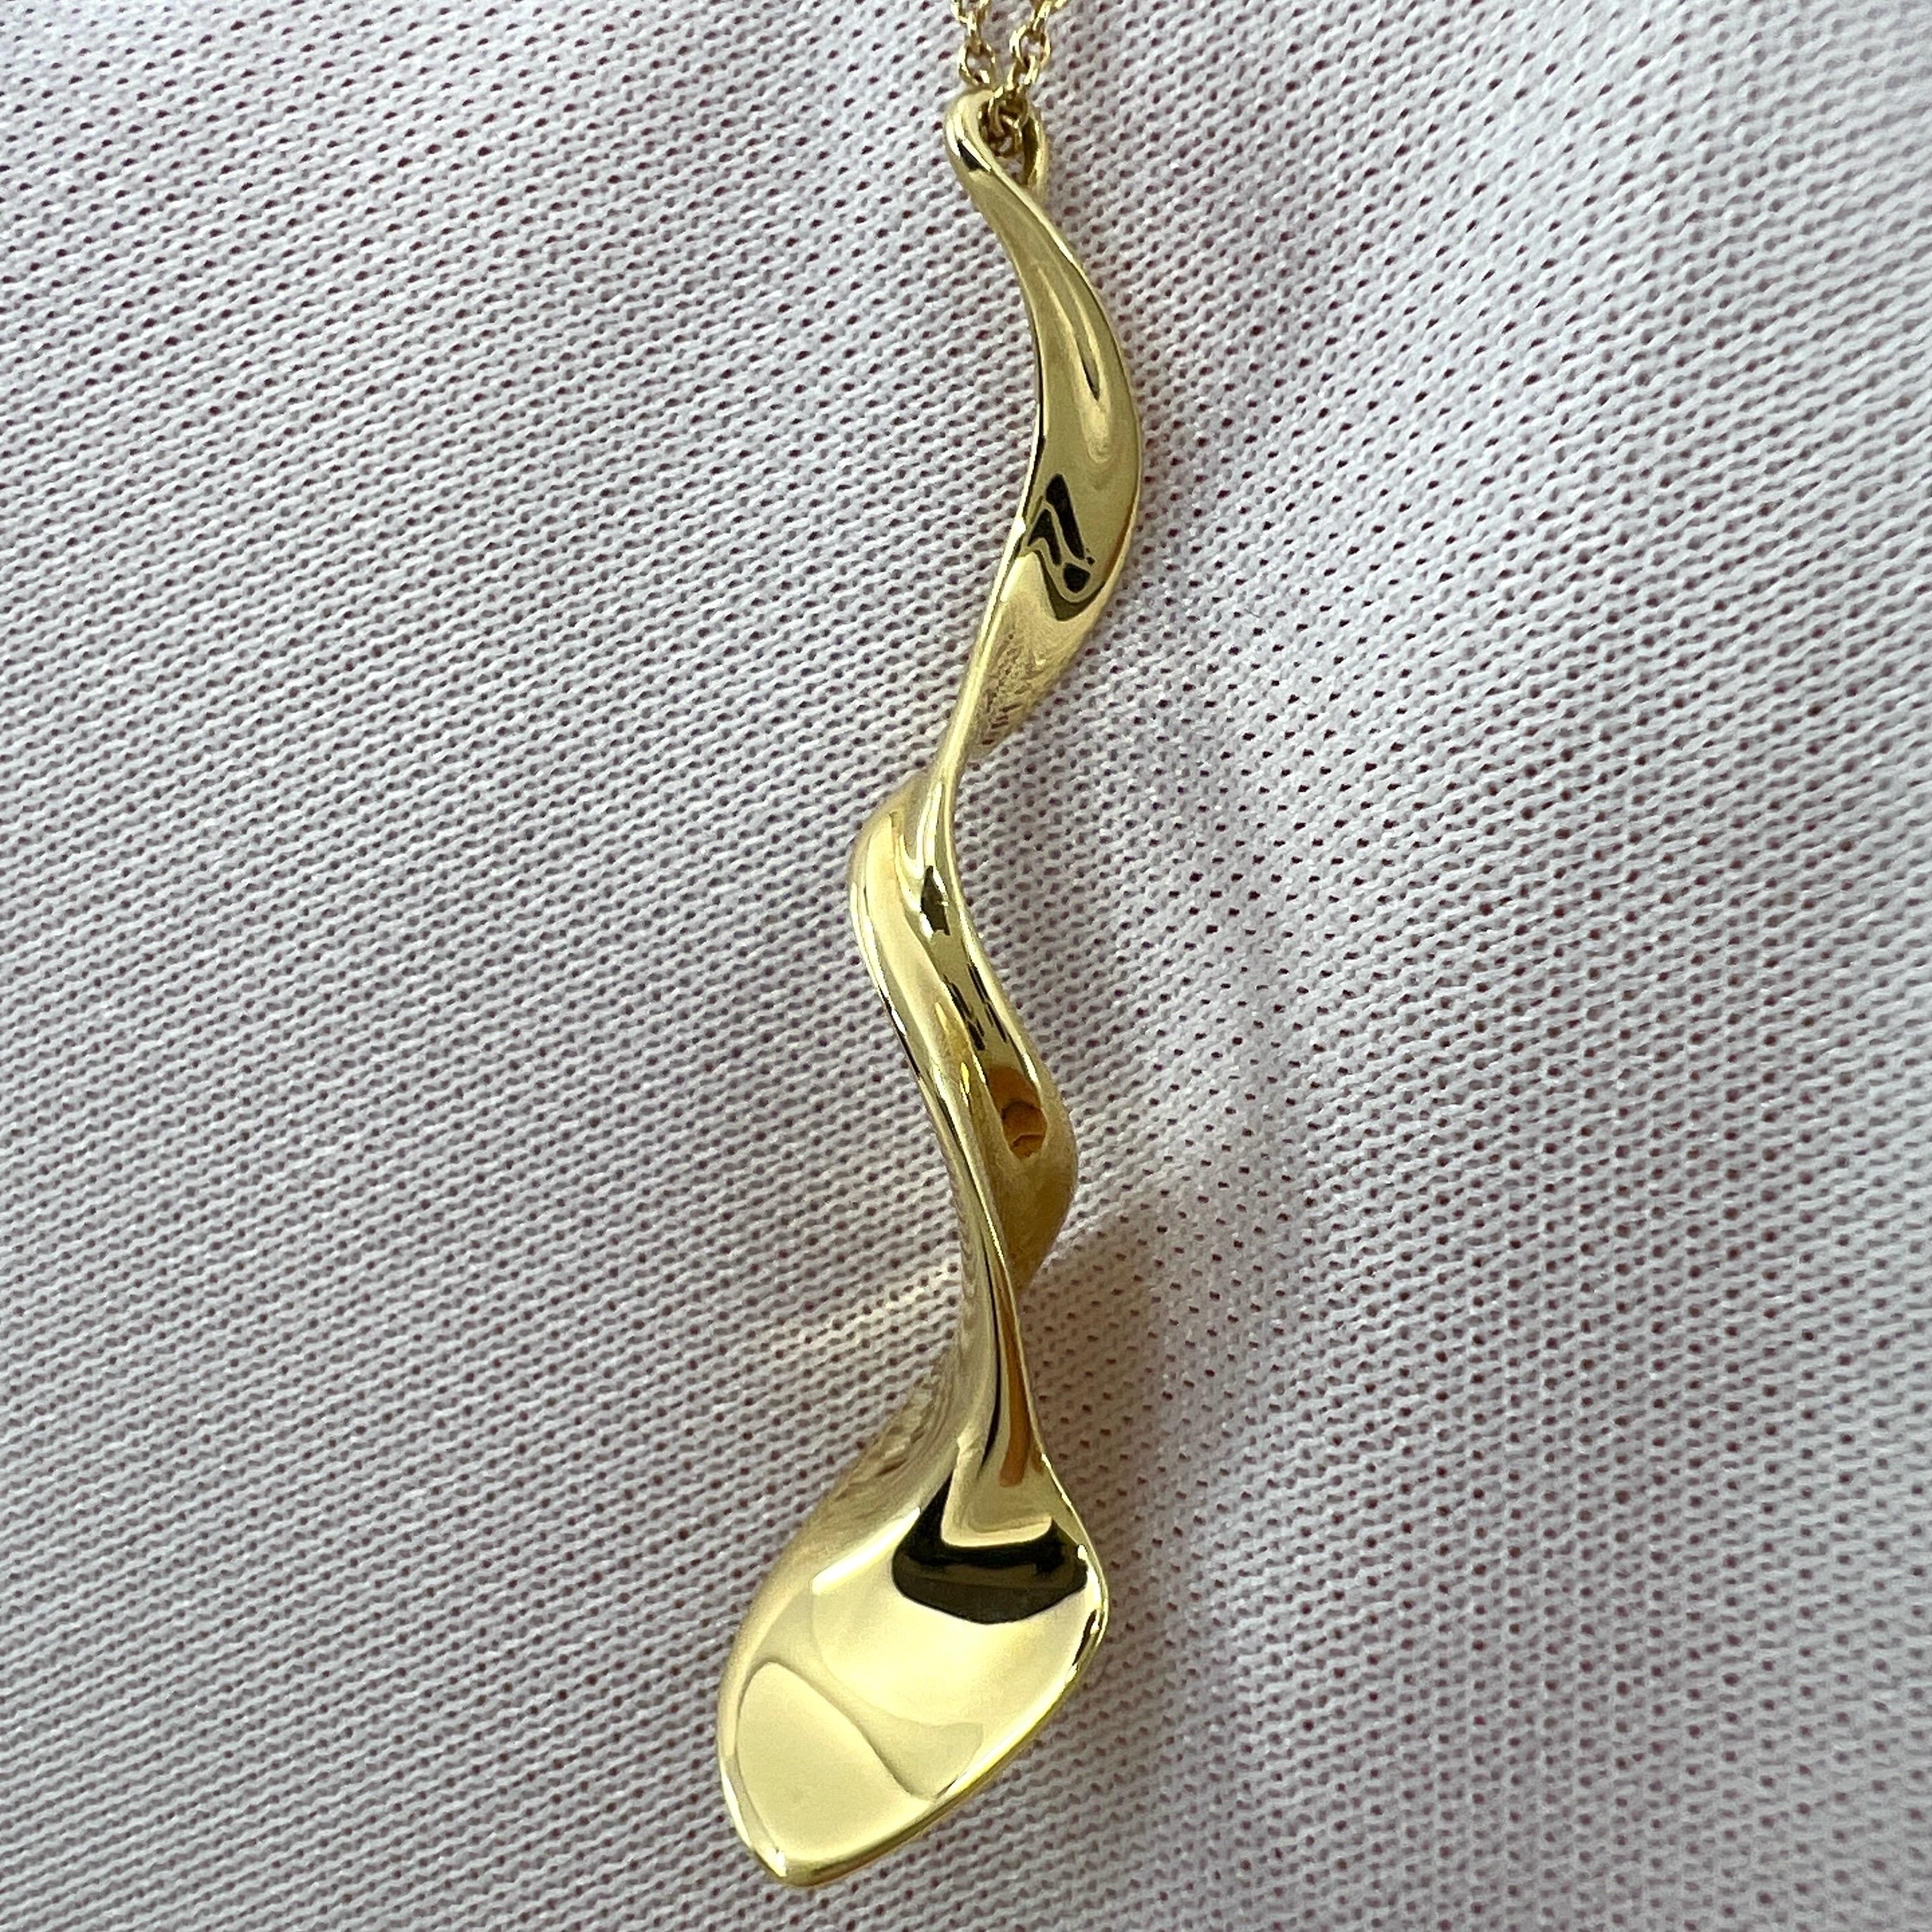 Tiffany & Co Frank Gehry 18k Yellow Gold Orchid Twist Spiral Pendant Necklace For Sale 5